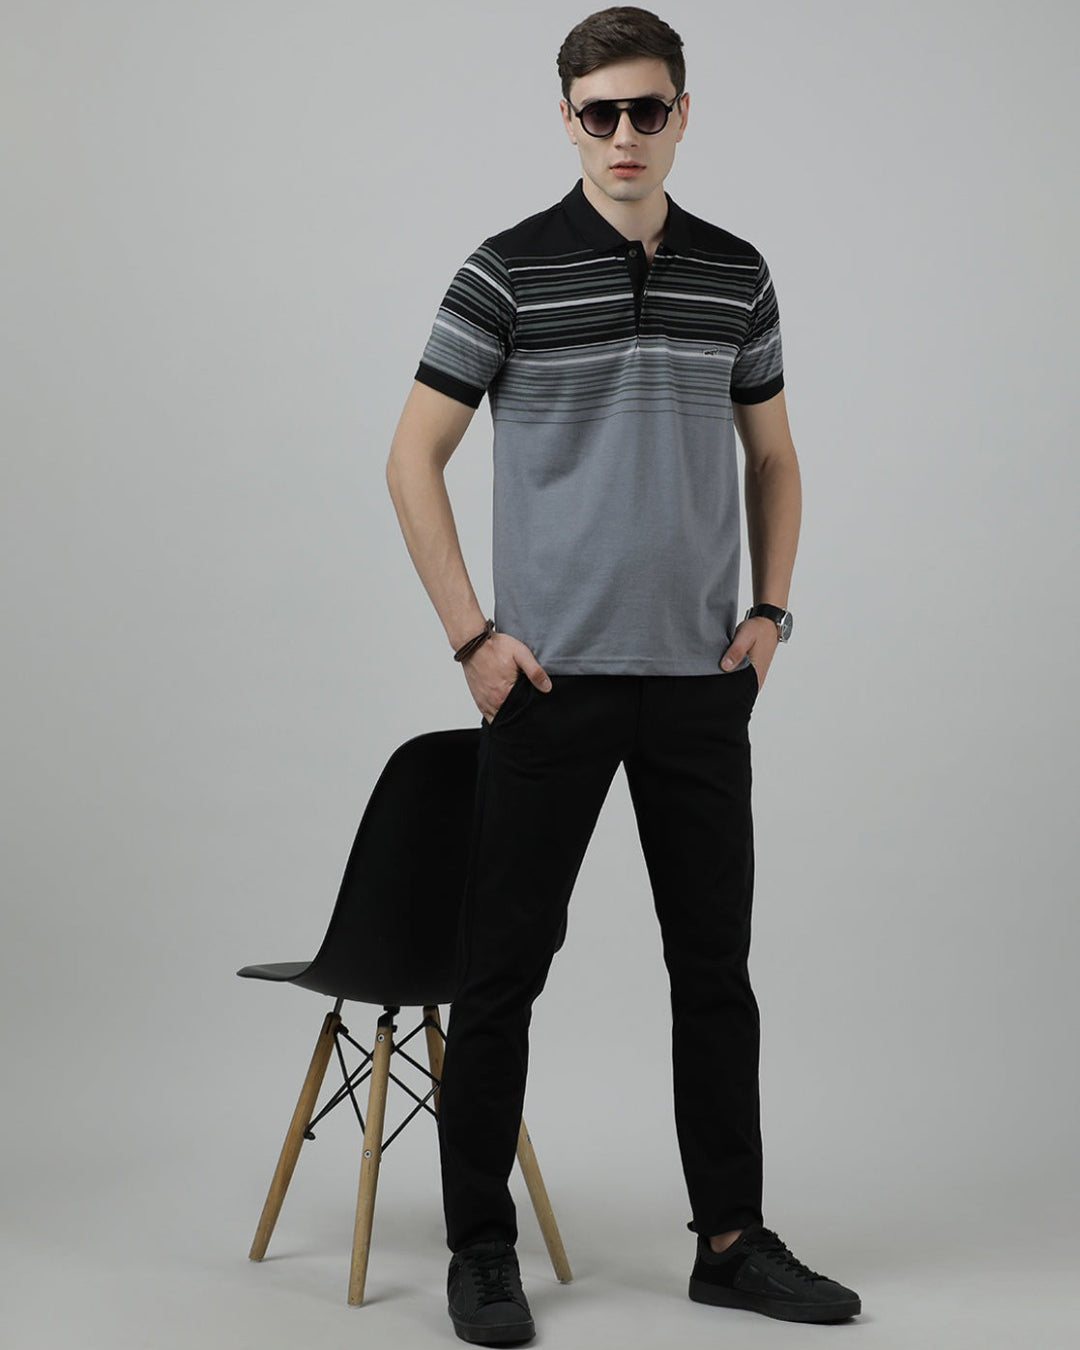 Crocodile Casual Black T-Shirt Half Sleeve Slim Fit Jersey Engineering Stripe with Collar for Men